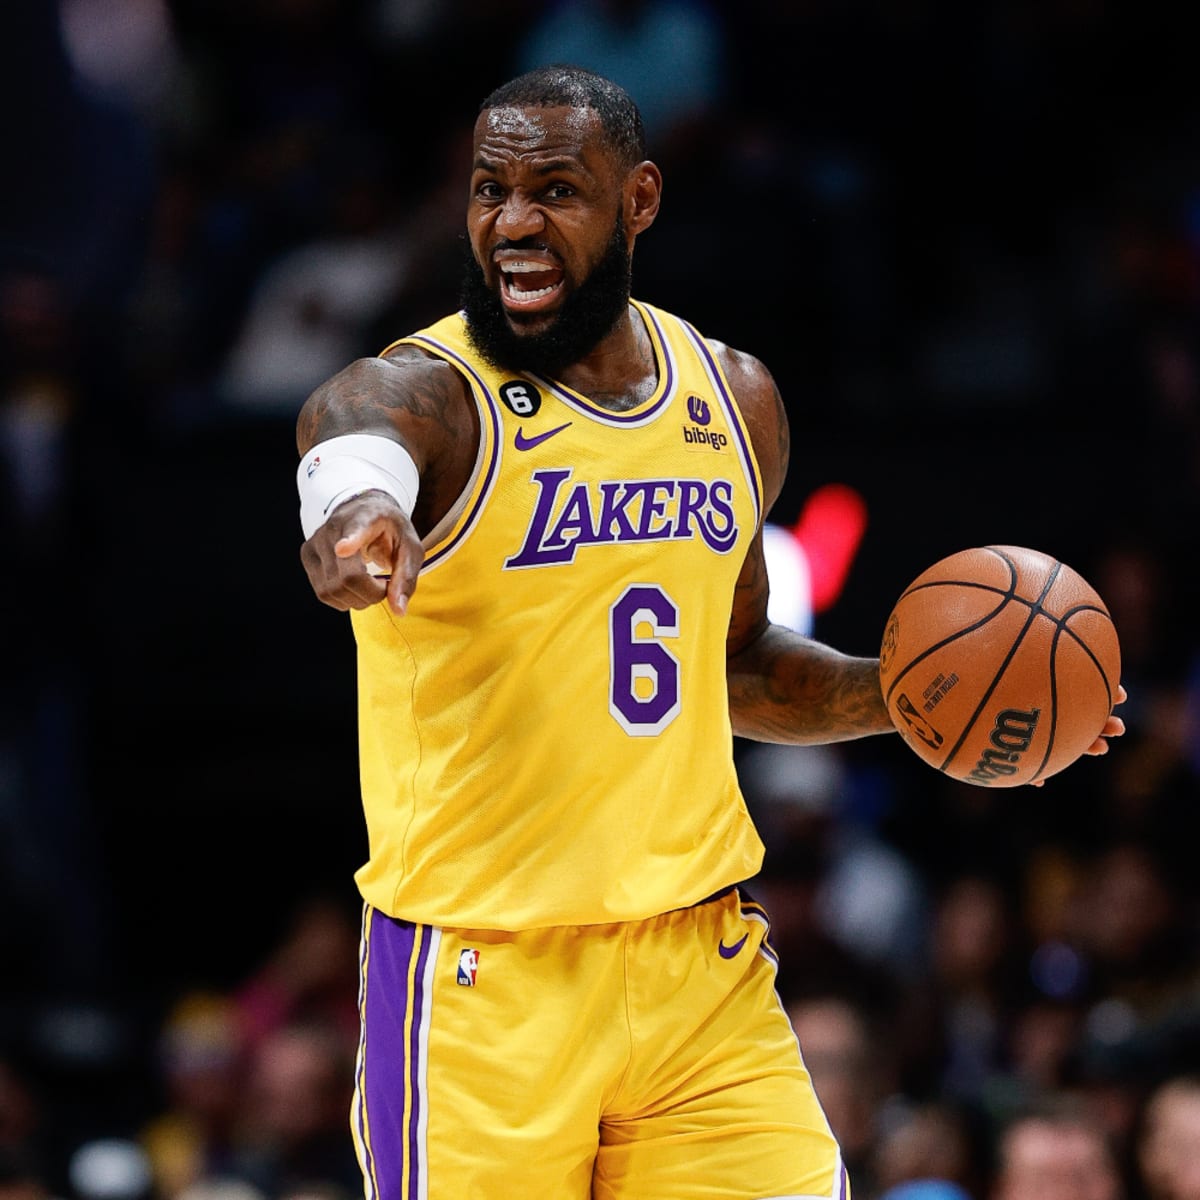 It's very humbling': LeBron James' gracious reaction to surpassing